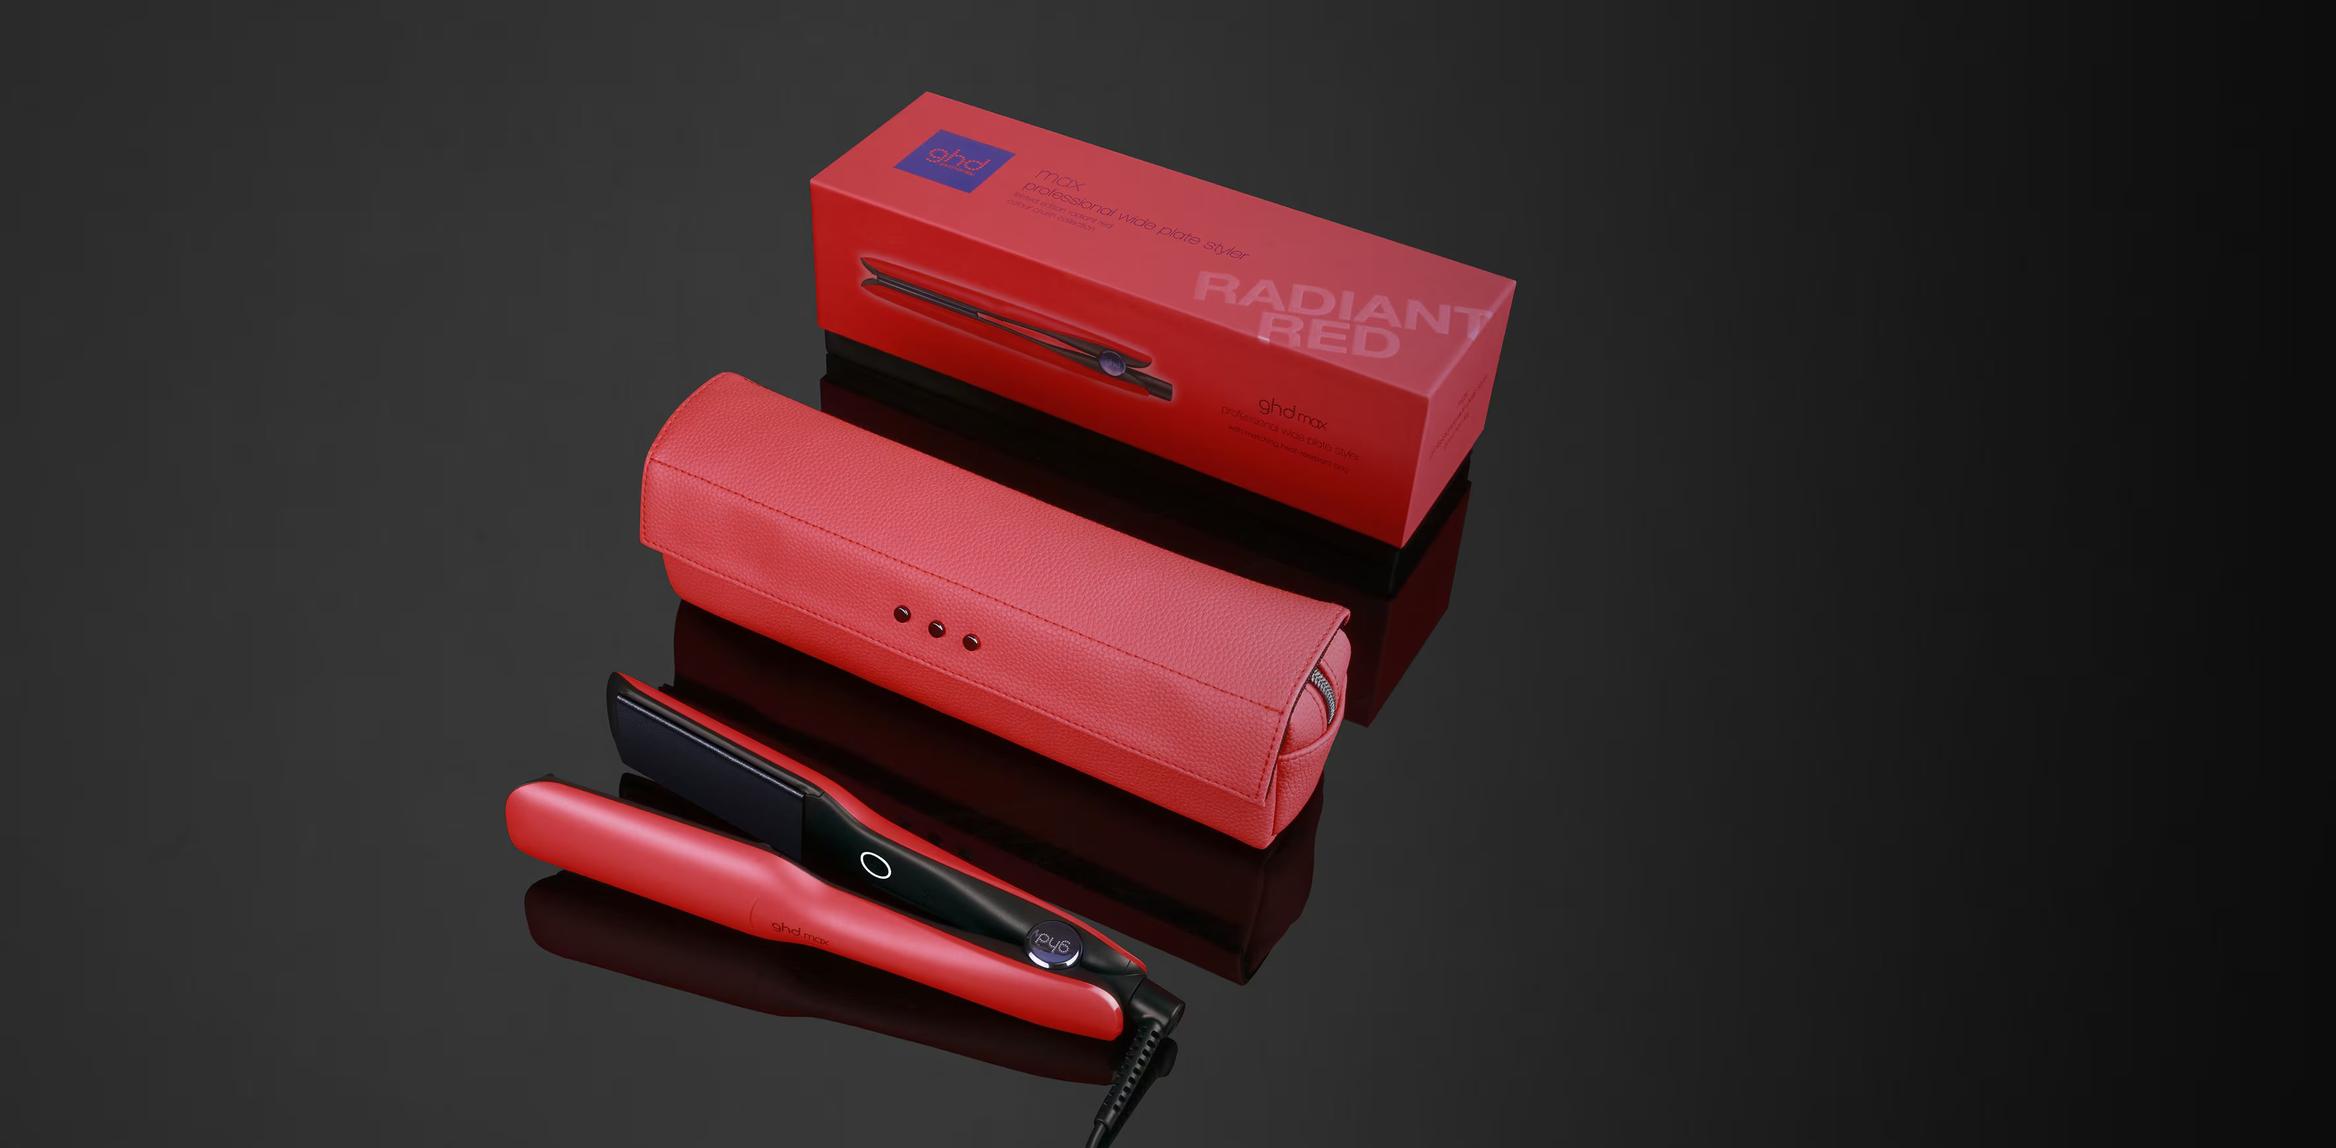 NEW GHD MAX WIDE HAIR STRAIGHTENER IN RADIANT RED offers at $380 in ghd